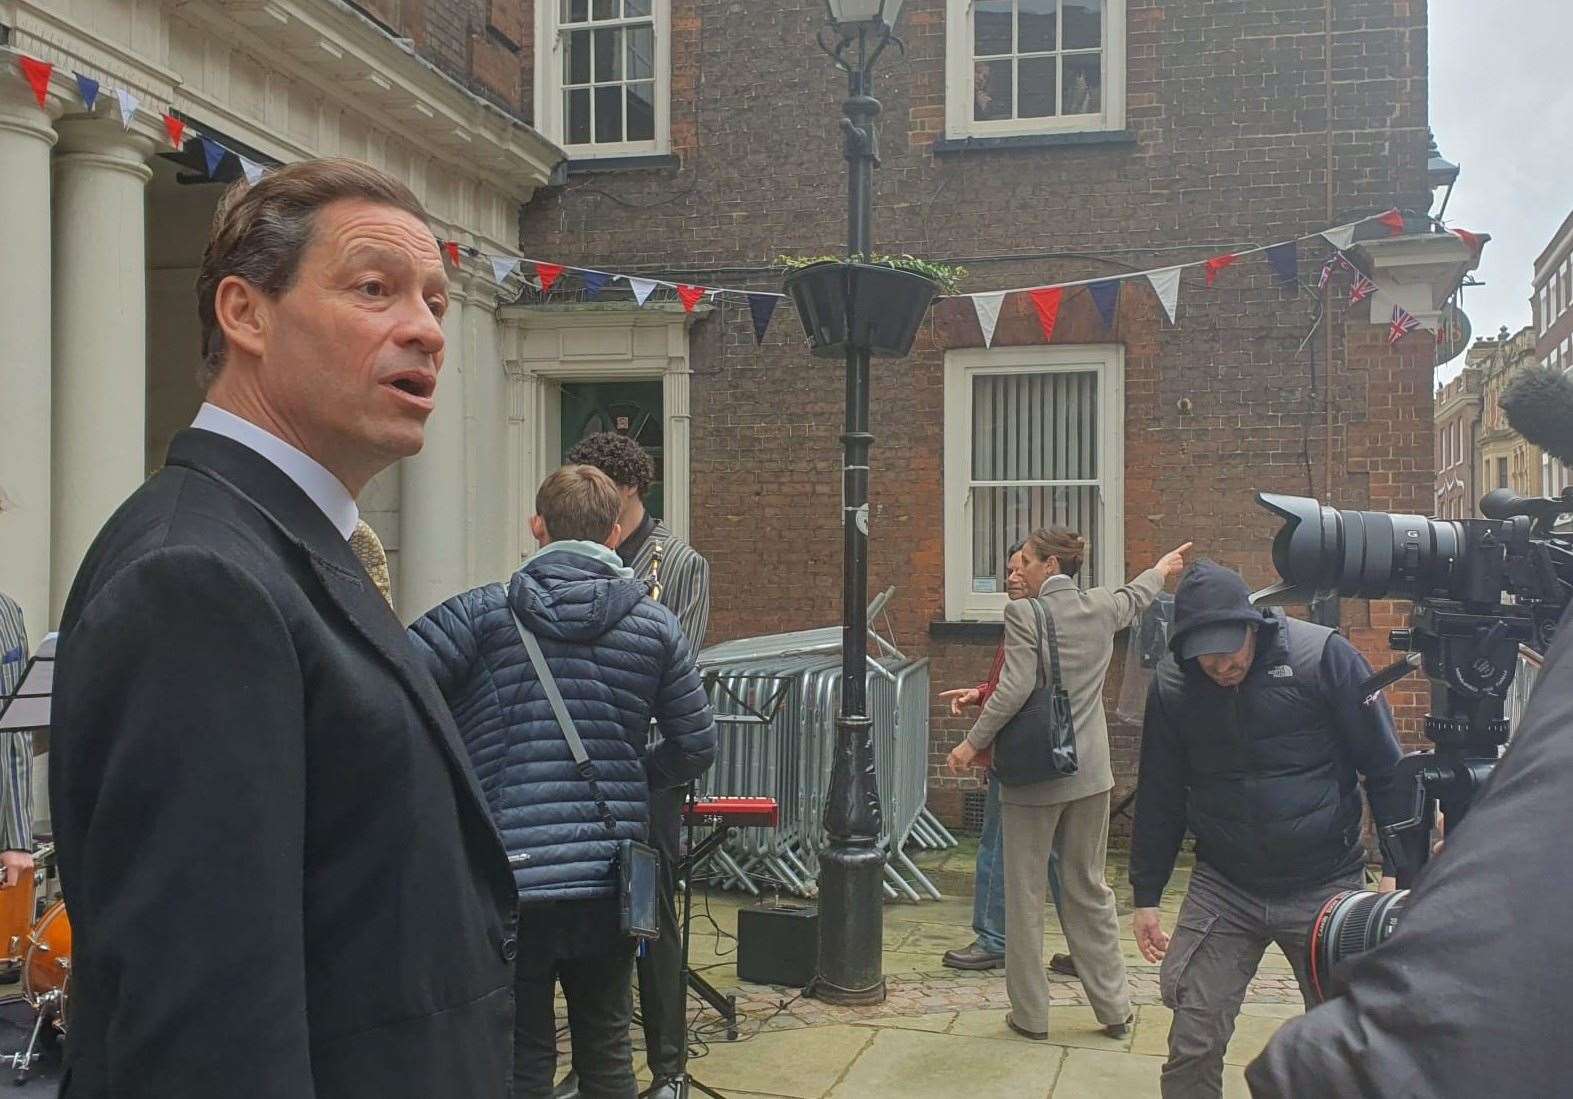 Dominic West, who stars as King Charles in the latest season, was filming in the town last week